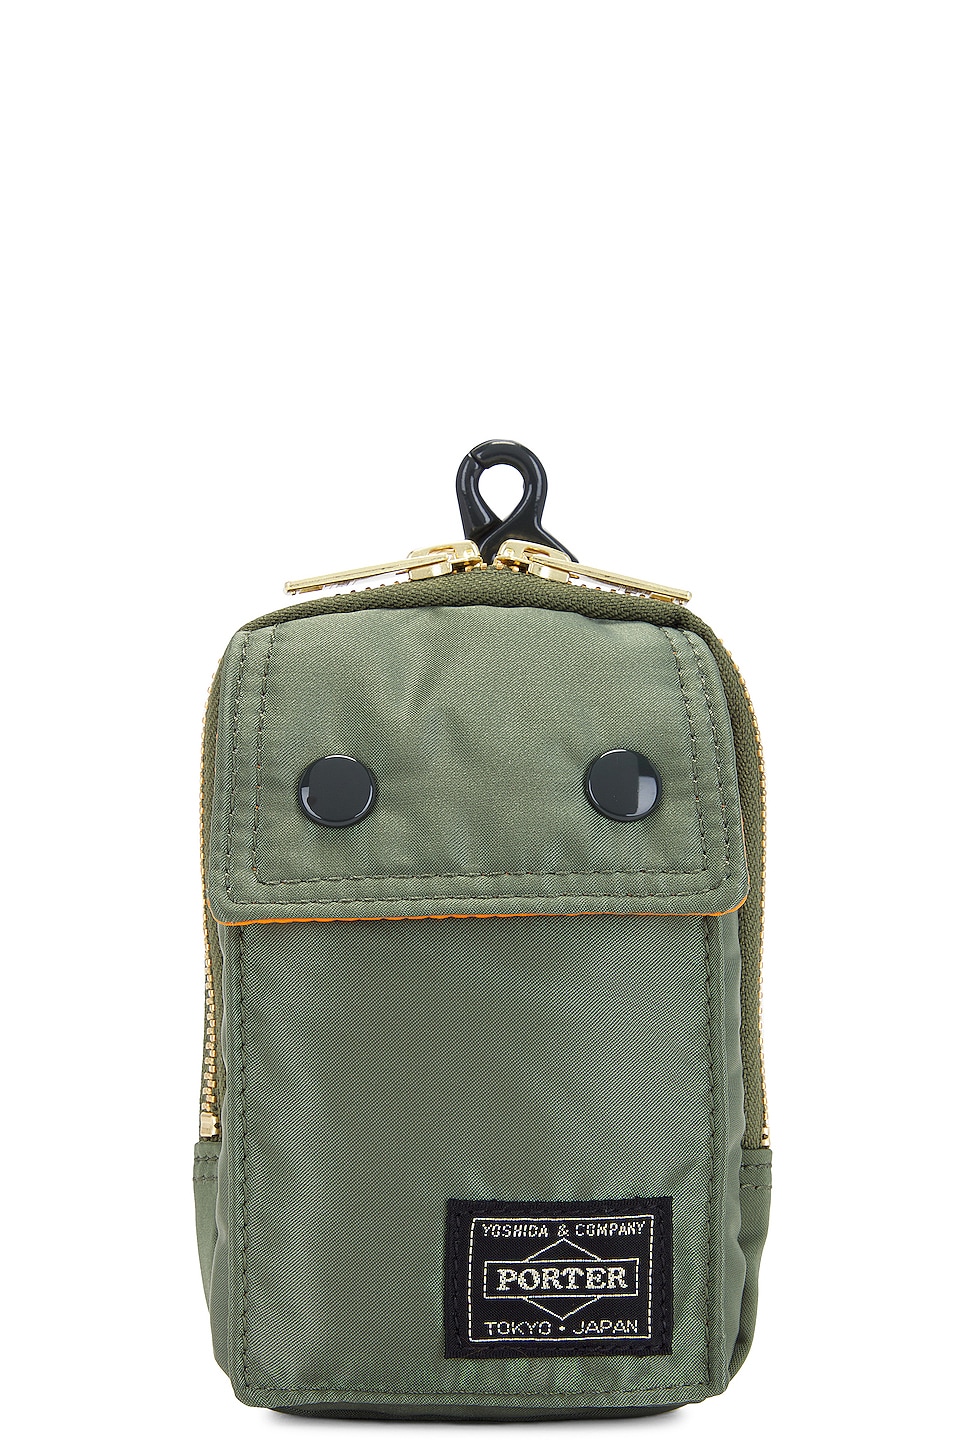 Tanker Pouch in Sage